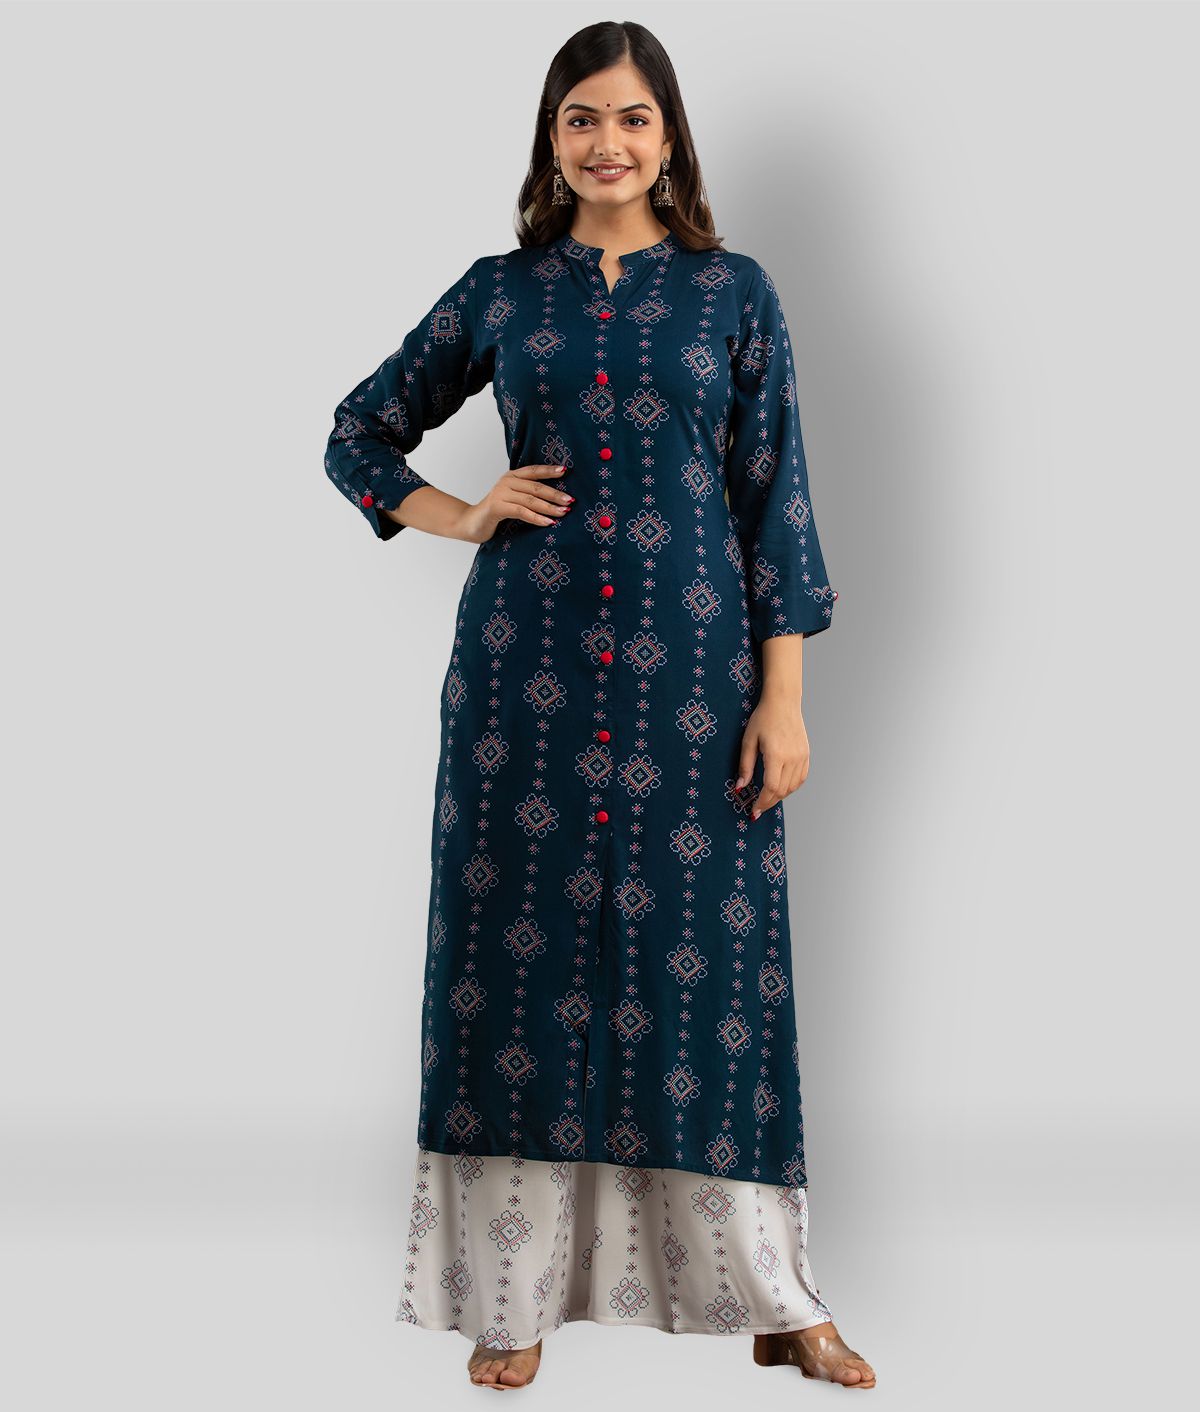     			Lee Moda - Navy Blue Straight Rayon Women's Stitched Salwar Suit ( Pack of 1 )